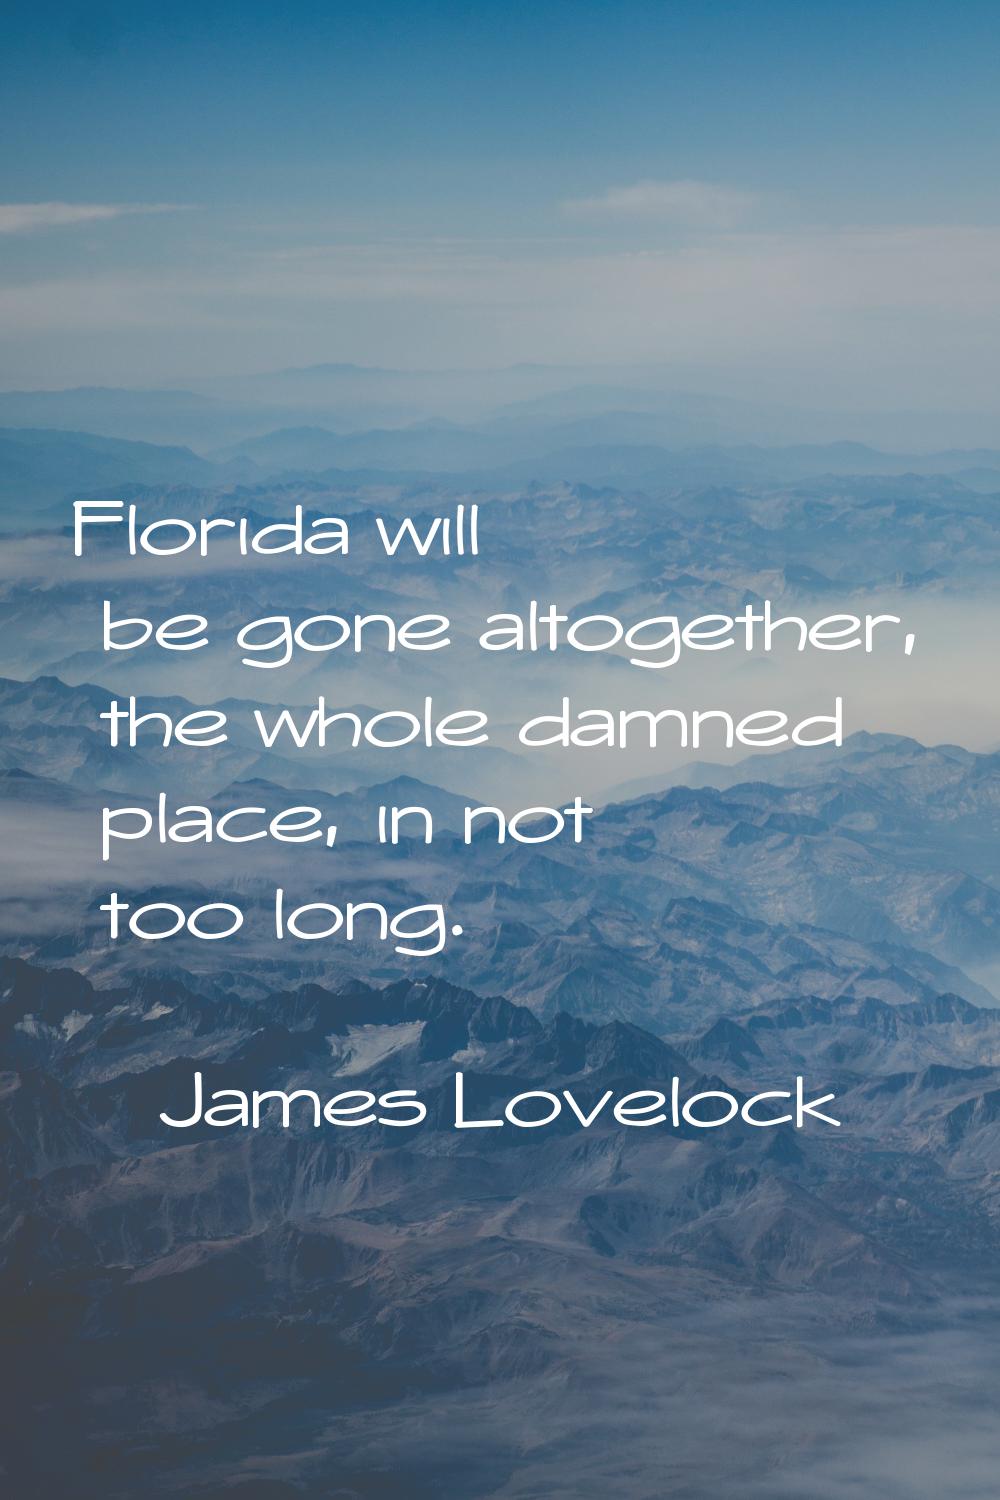 Florida will be gone altogether, the whole damned place, in not too long.